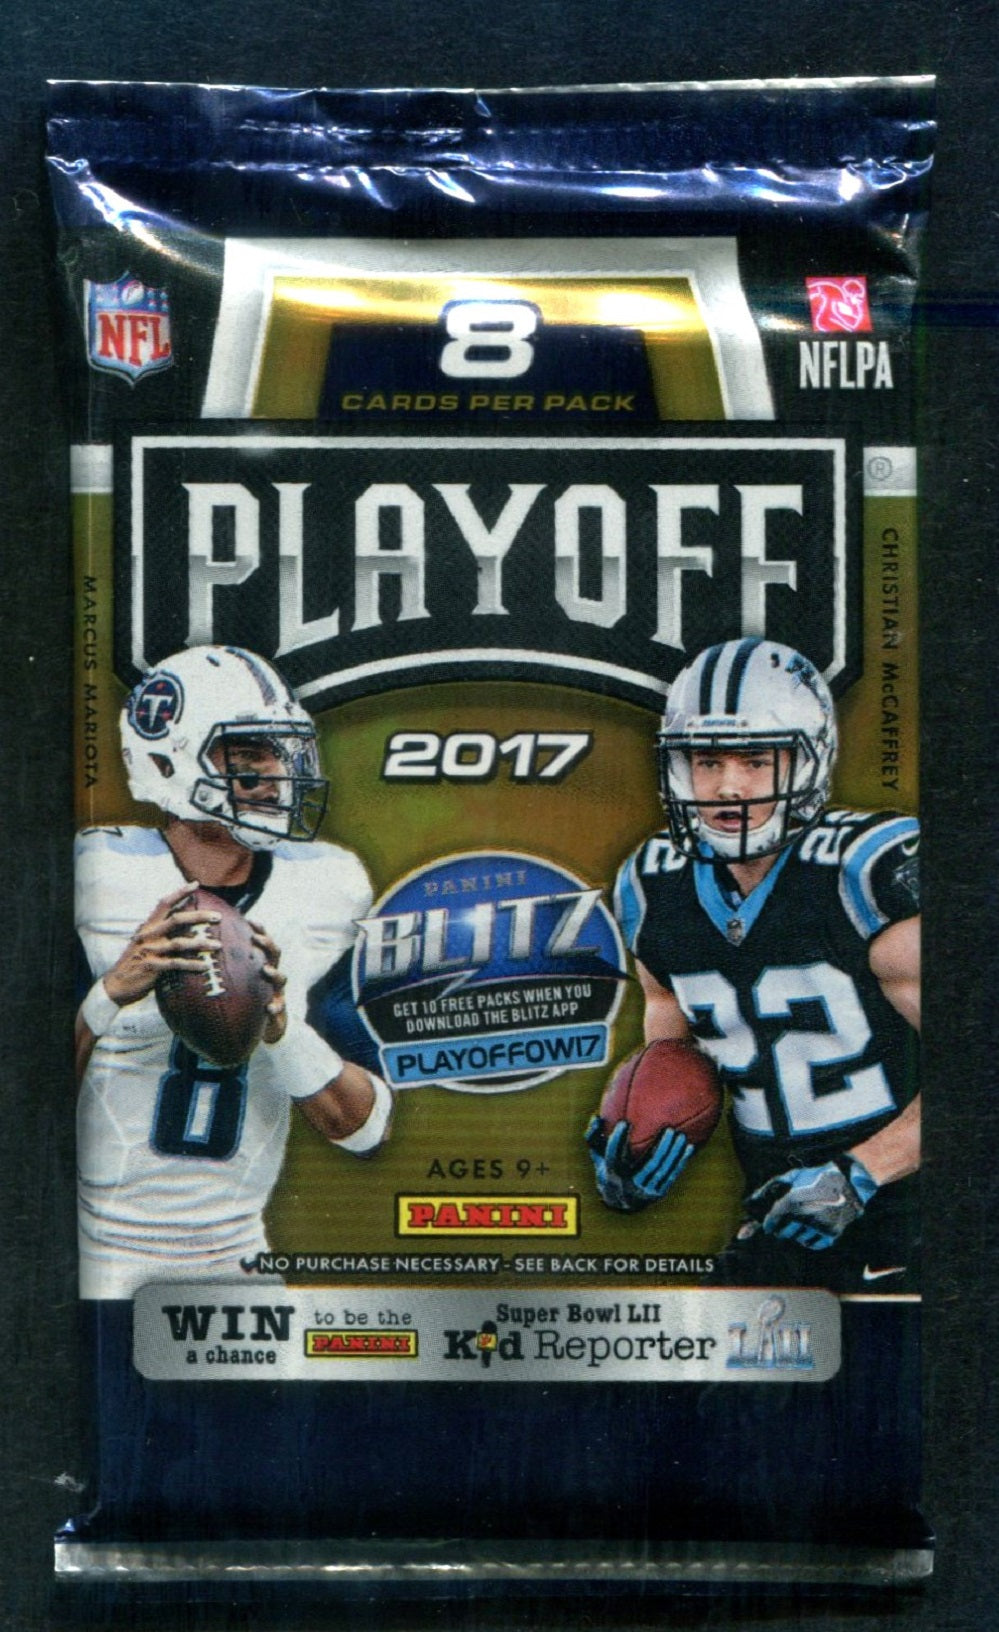 2017 Panini Playoff Football Unopened Pack (8 Cards)